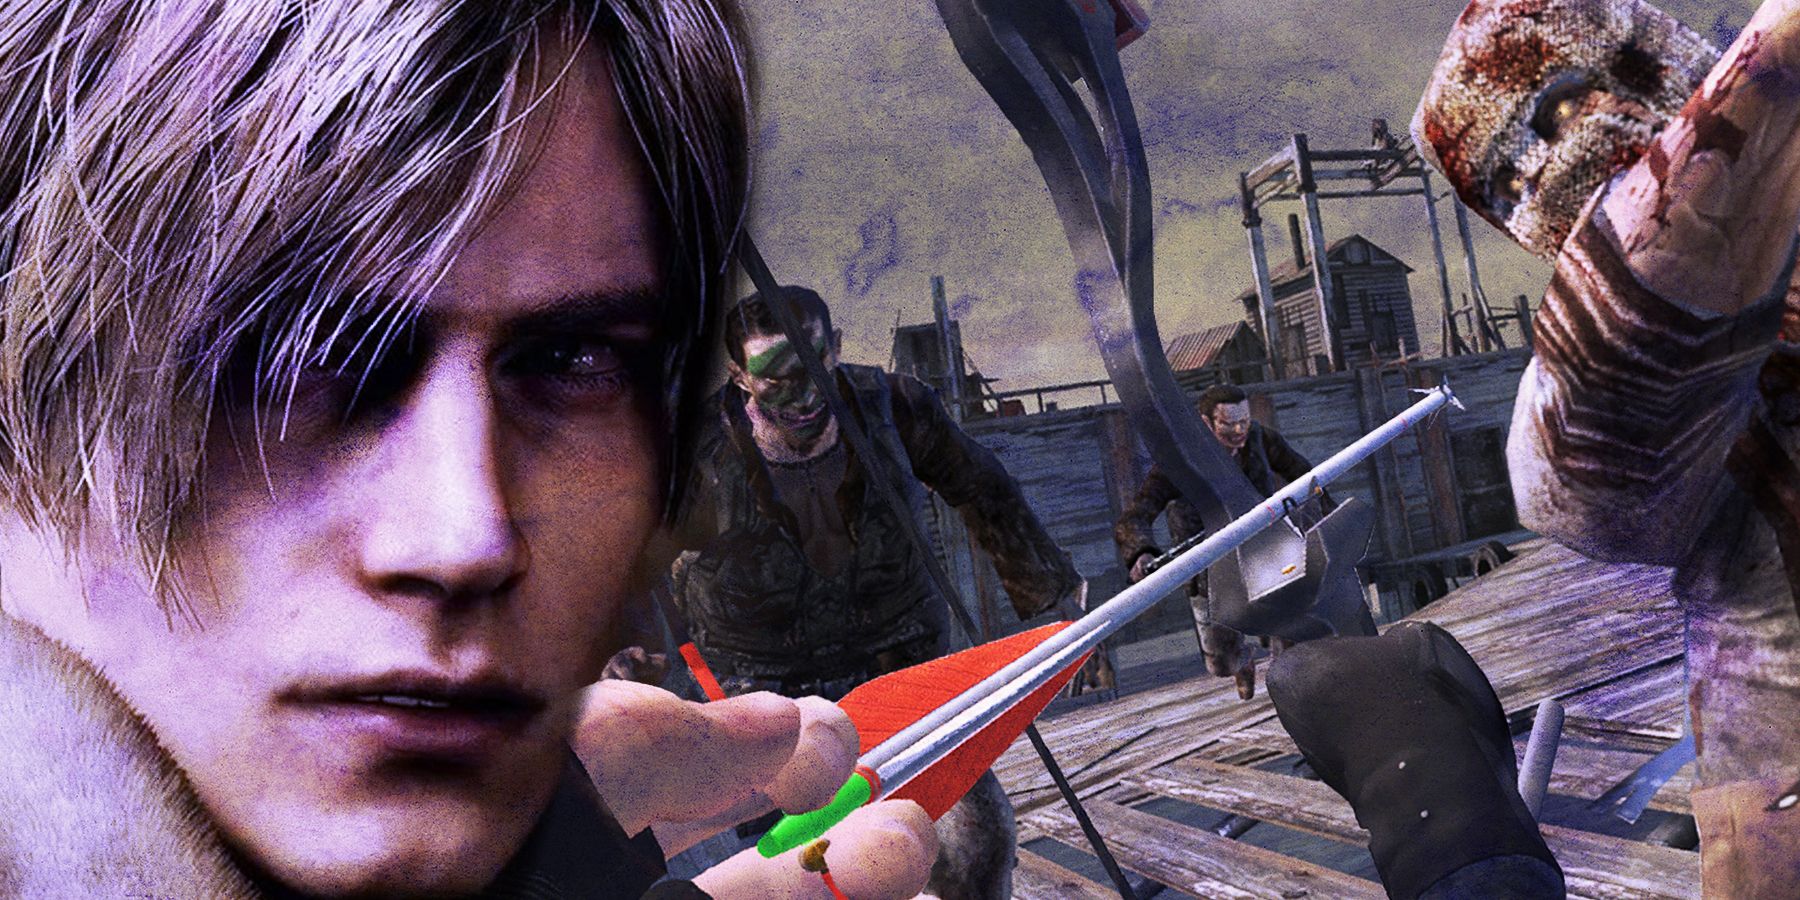 Every Version Of Resident Evil 4 Ever Released, Ranked By Metacritic Score